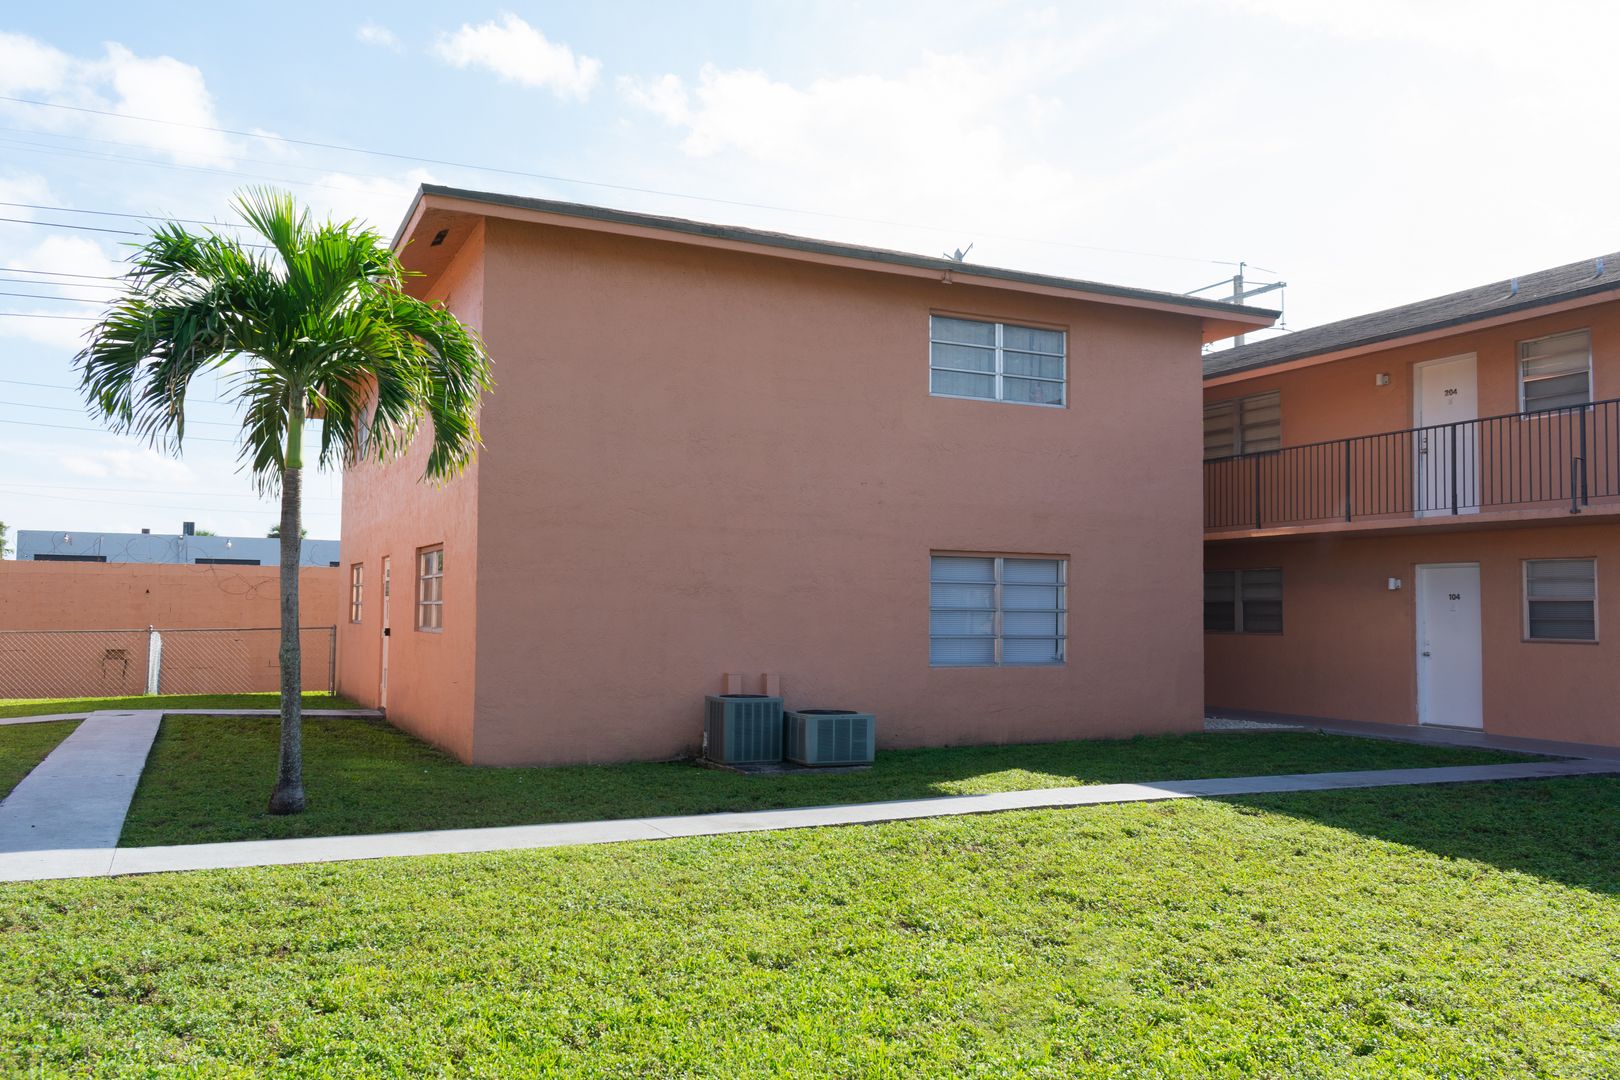 For Rent 1/1 for $1,650 in Hialeah